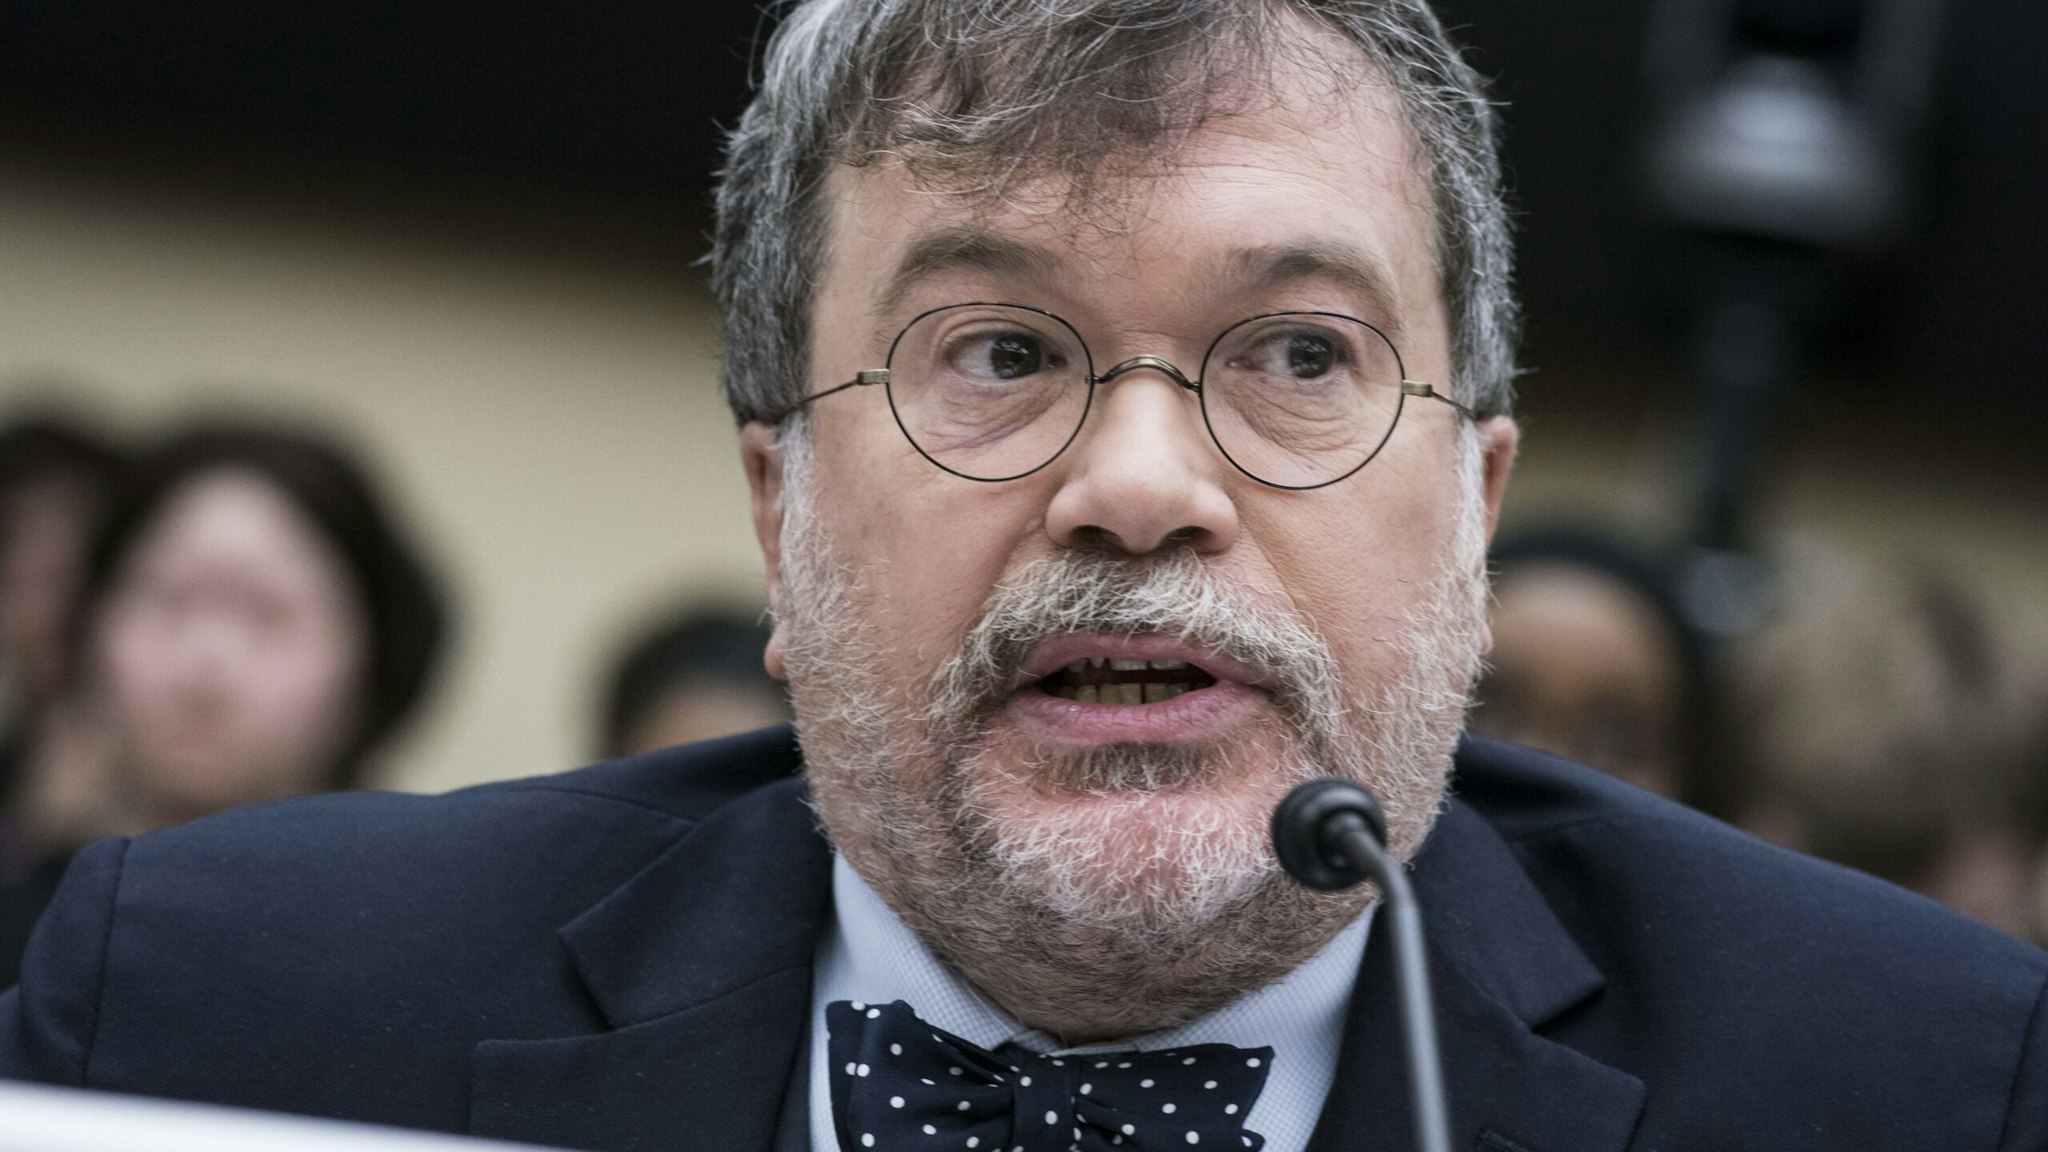 Peter Hotez, founding dean and chief of the Baylor College of Medicine National School of Tropical Medicine, speaks during a House Science, Space and Technology Committee hearing on Capitol Hill in Washington, D.C., U.S., on Thursday, March 5, 2020.